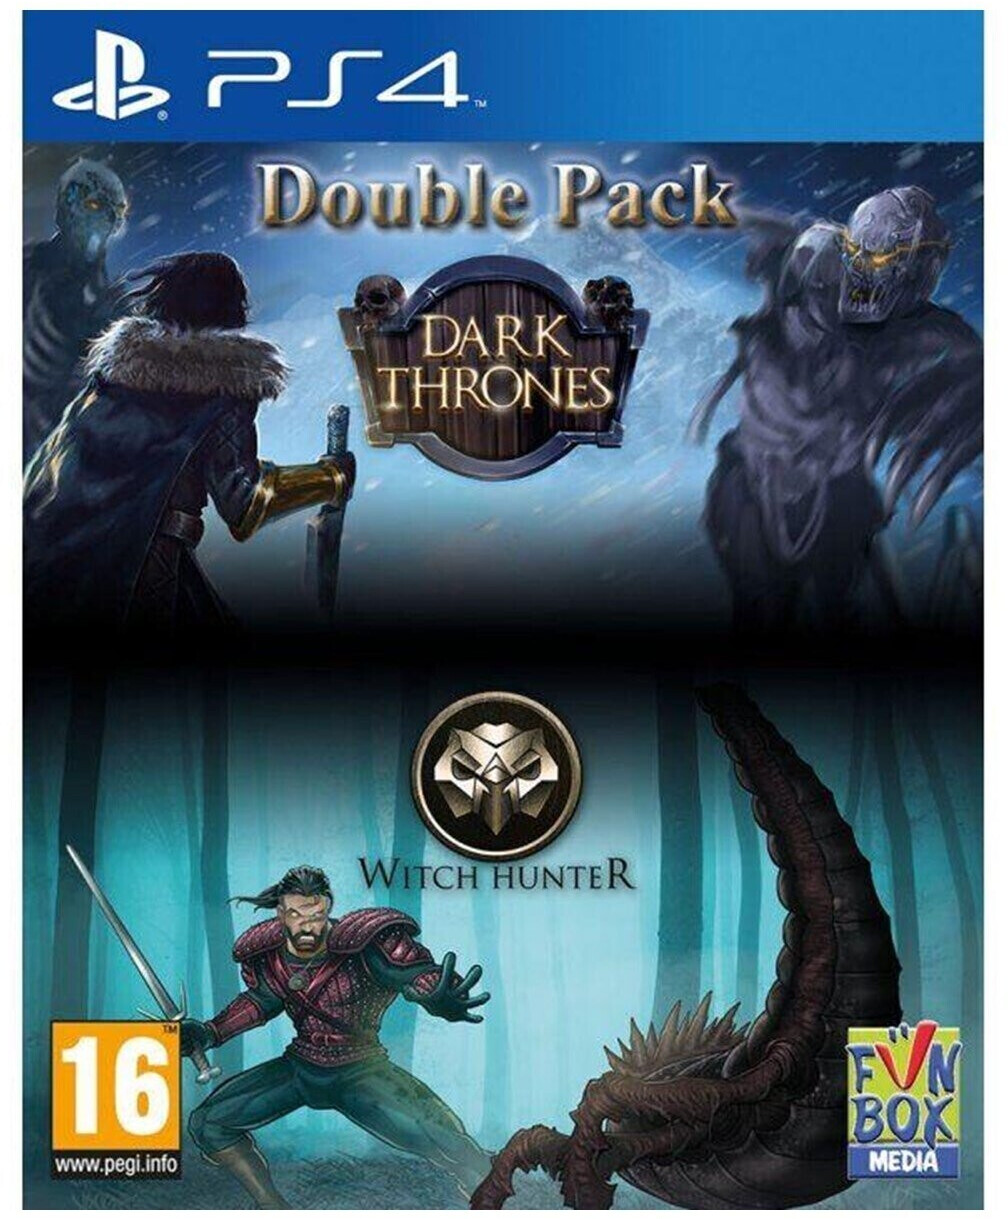 Photos - Game Funbox Media Dark Thrones + Witch Hunter  (PS4) (Double Pack)